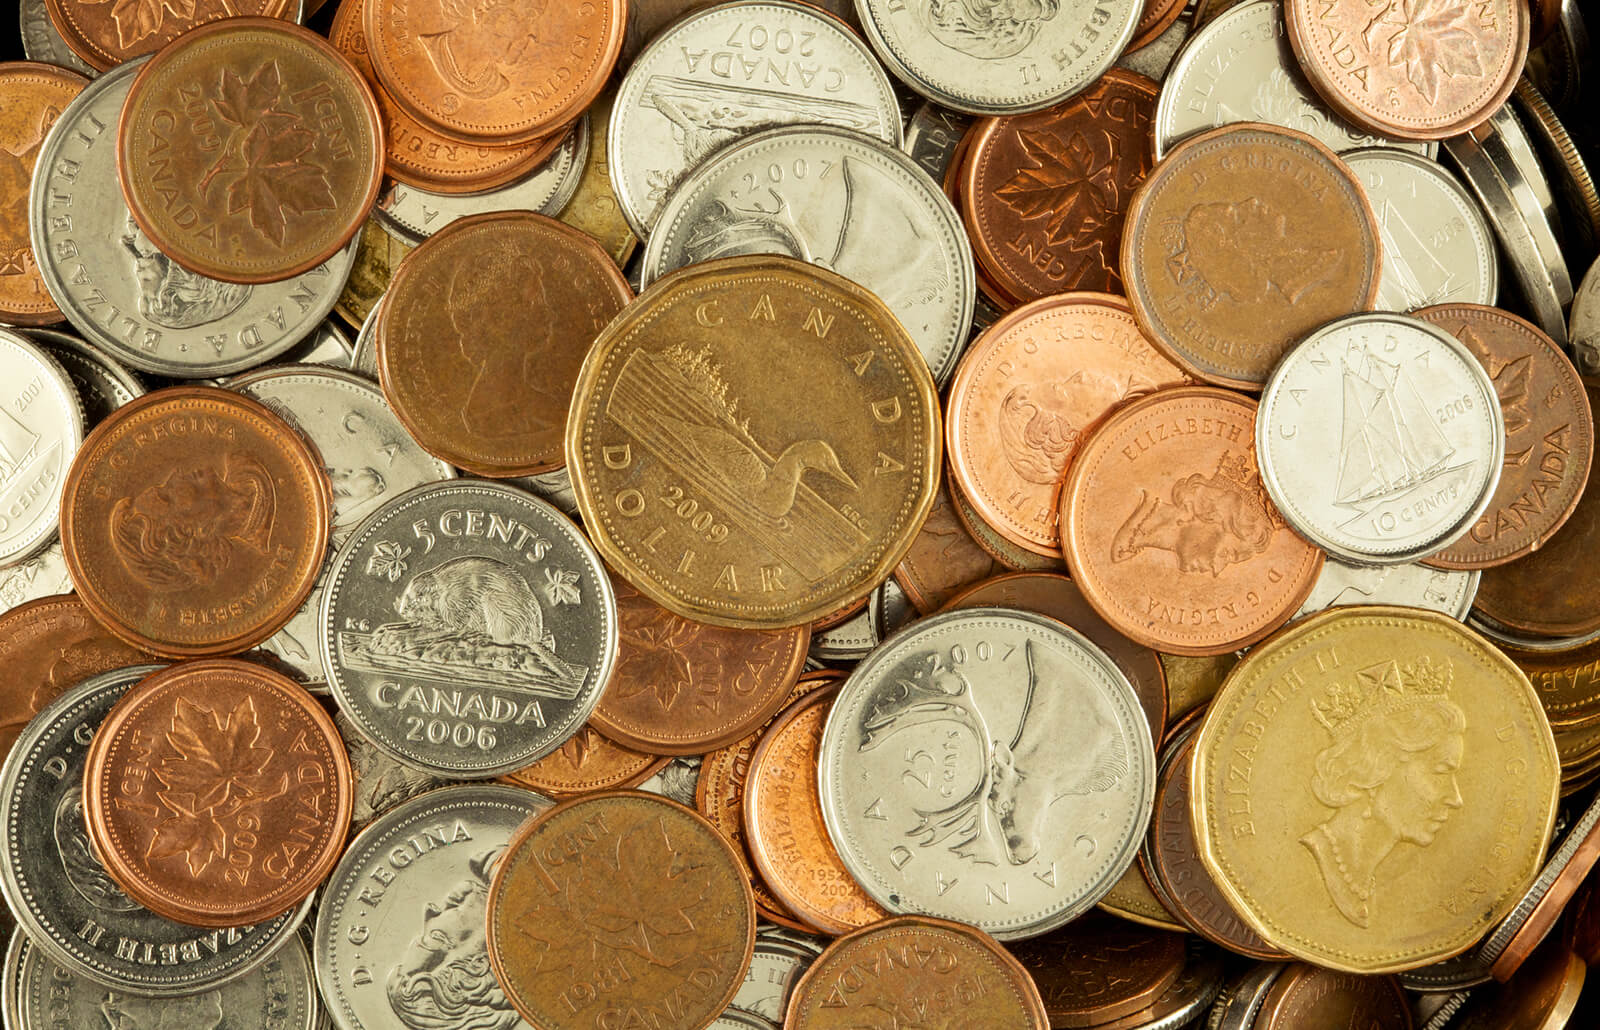 Discover the Most Valuable $2 Canadian Coins Worth Money